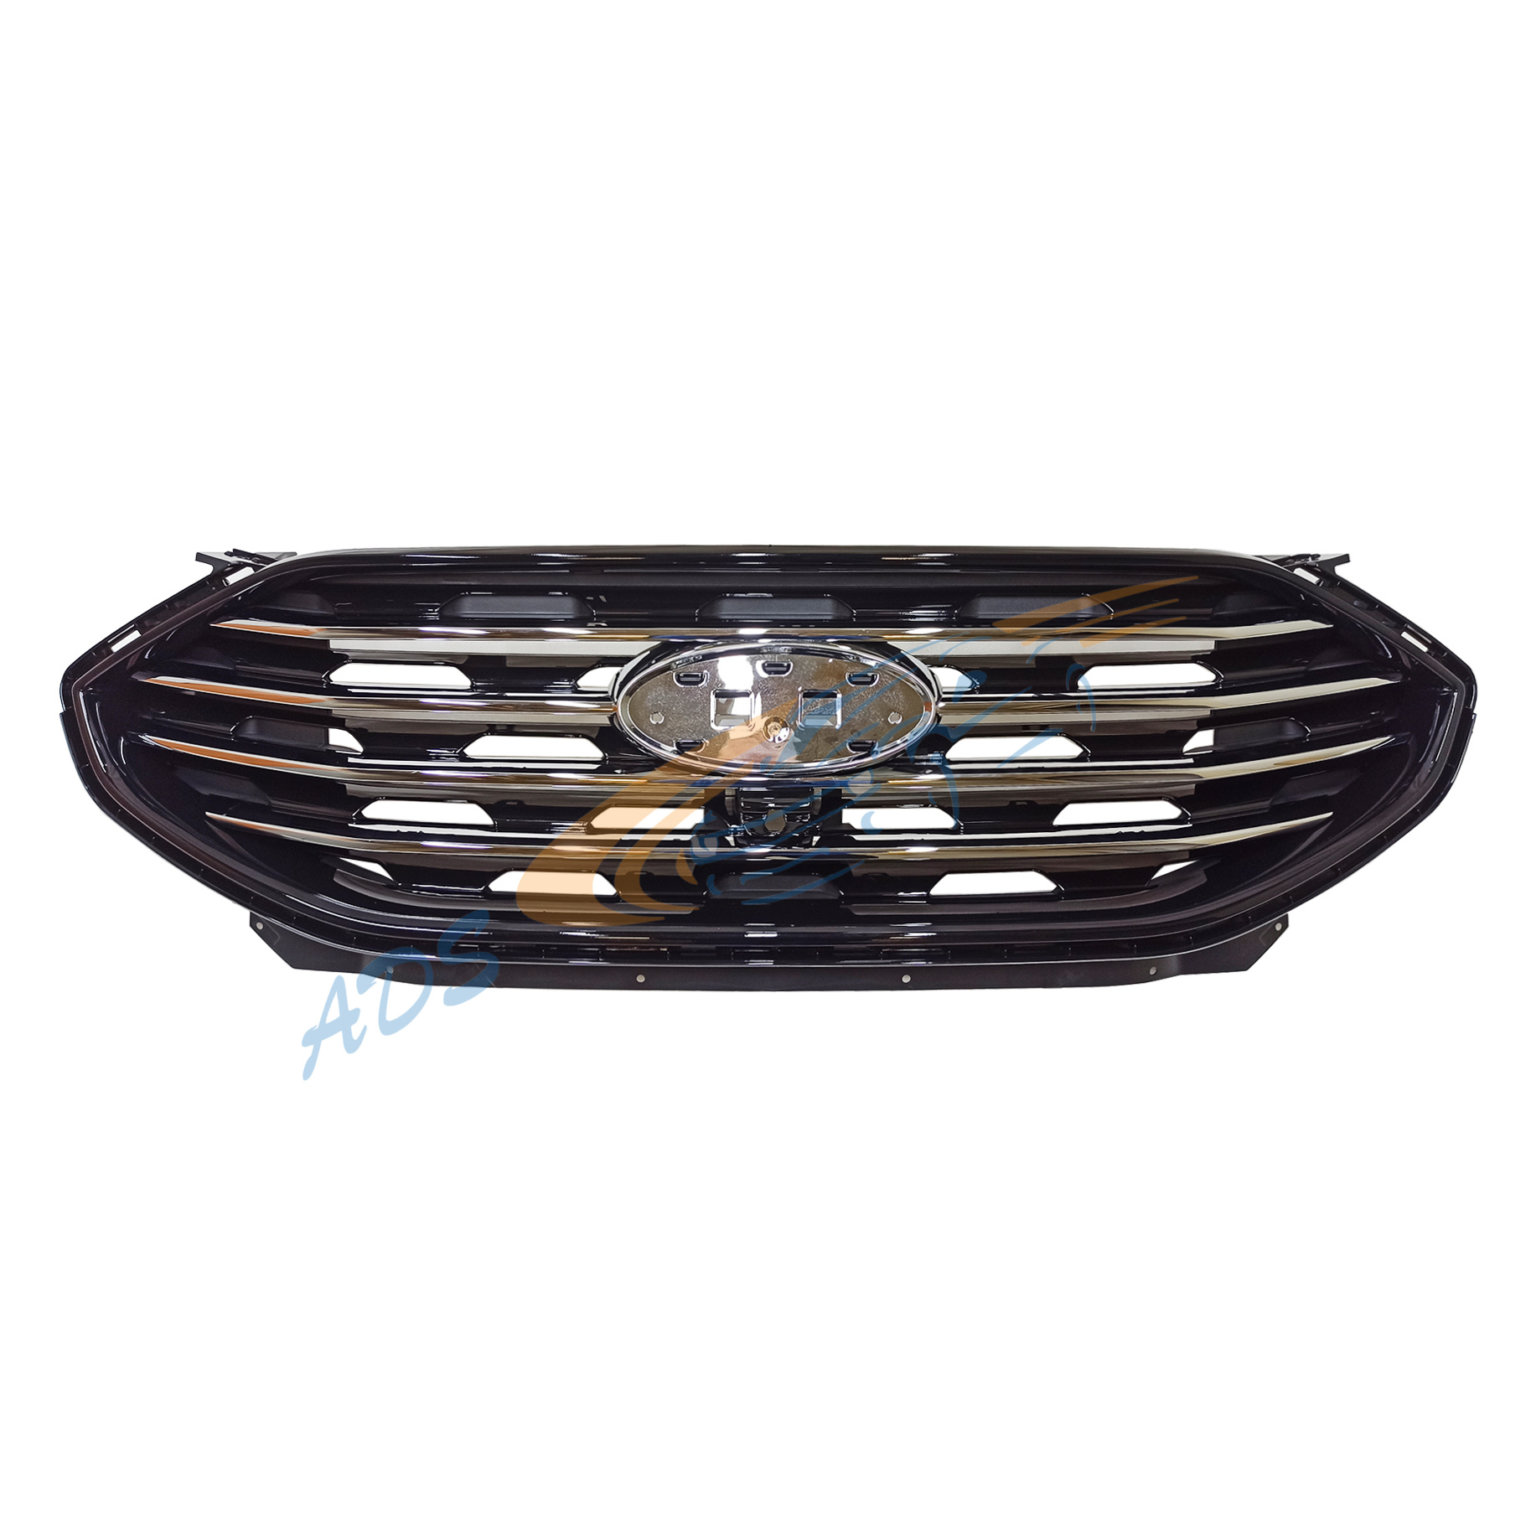 Grille With Camera Hole Ford Edge 2019 Ads Auto Parts